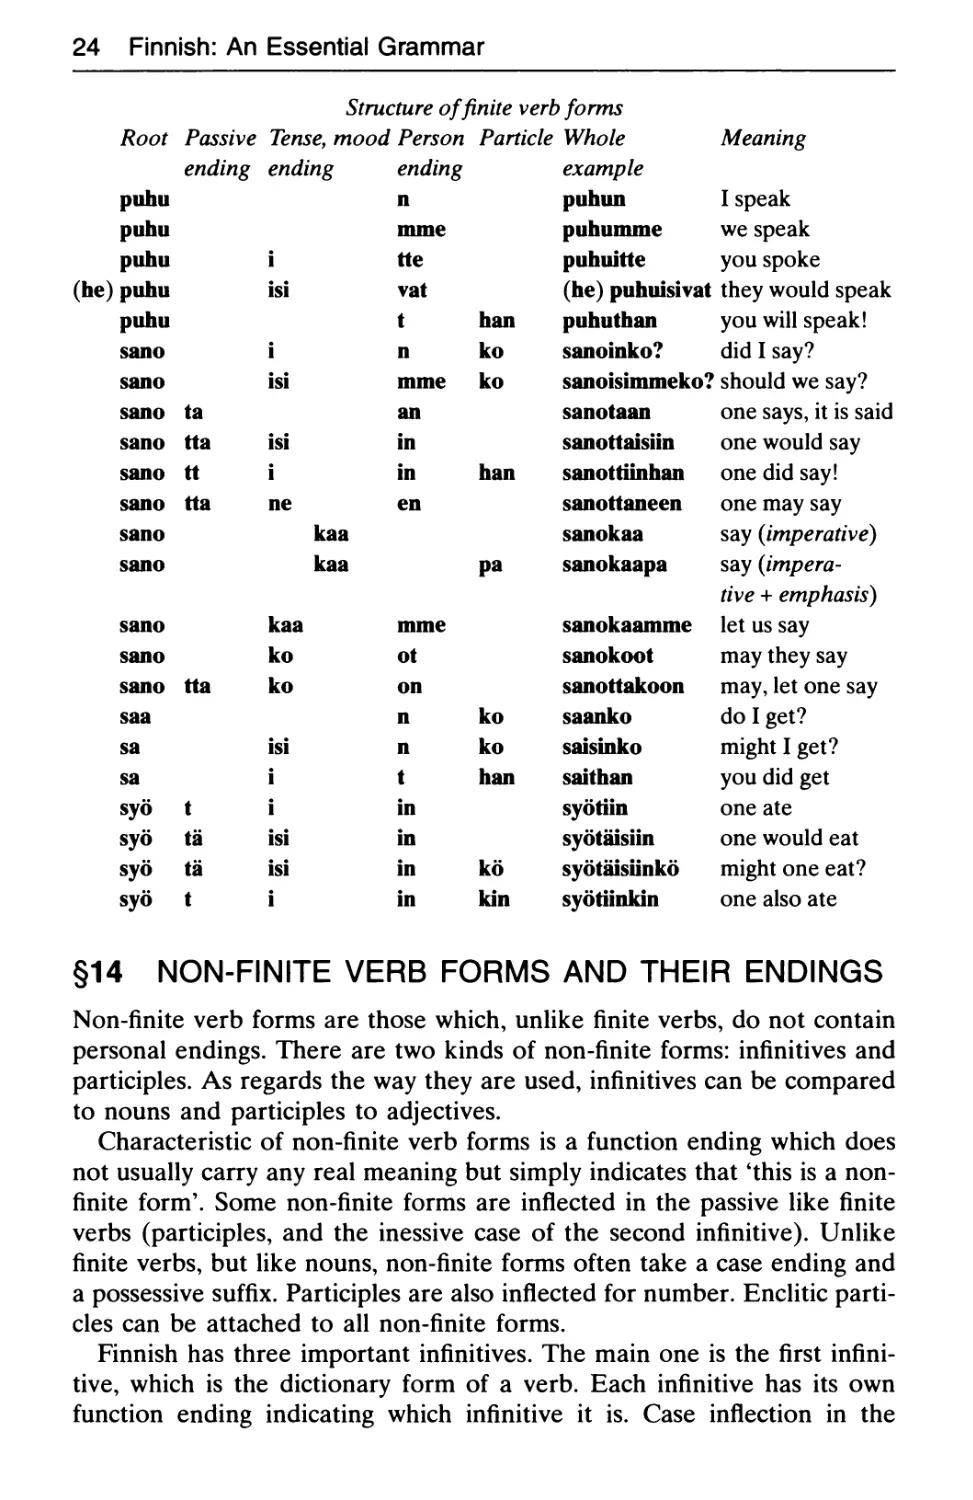 §14 Non-finite verb forms and their endings